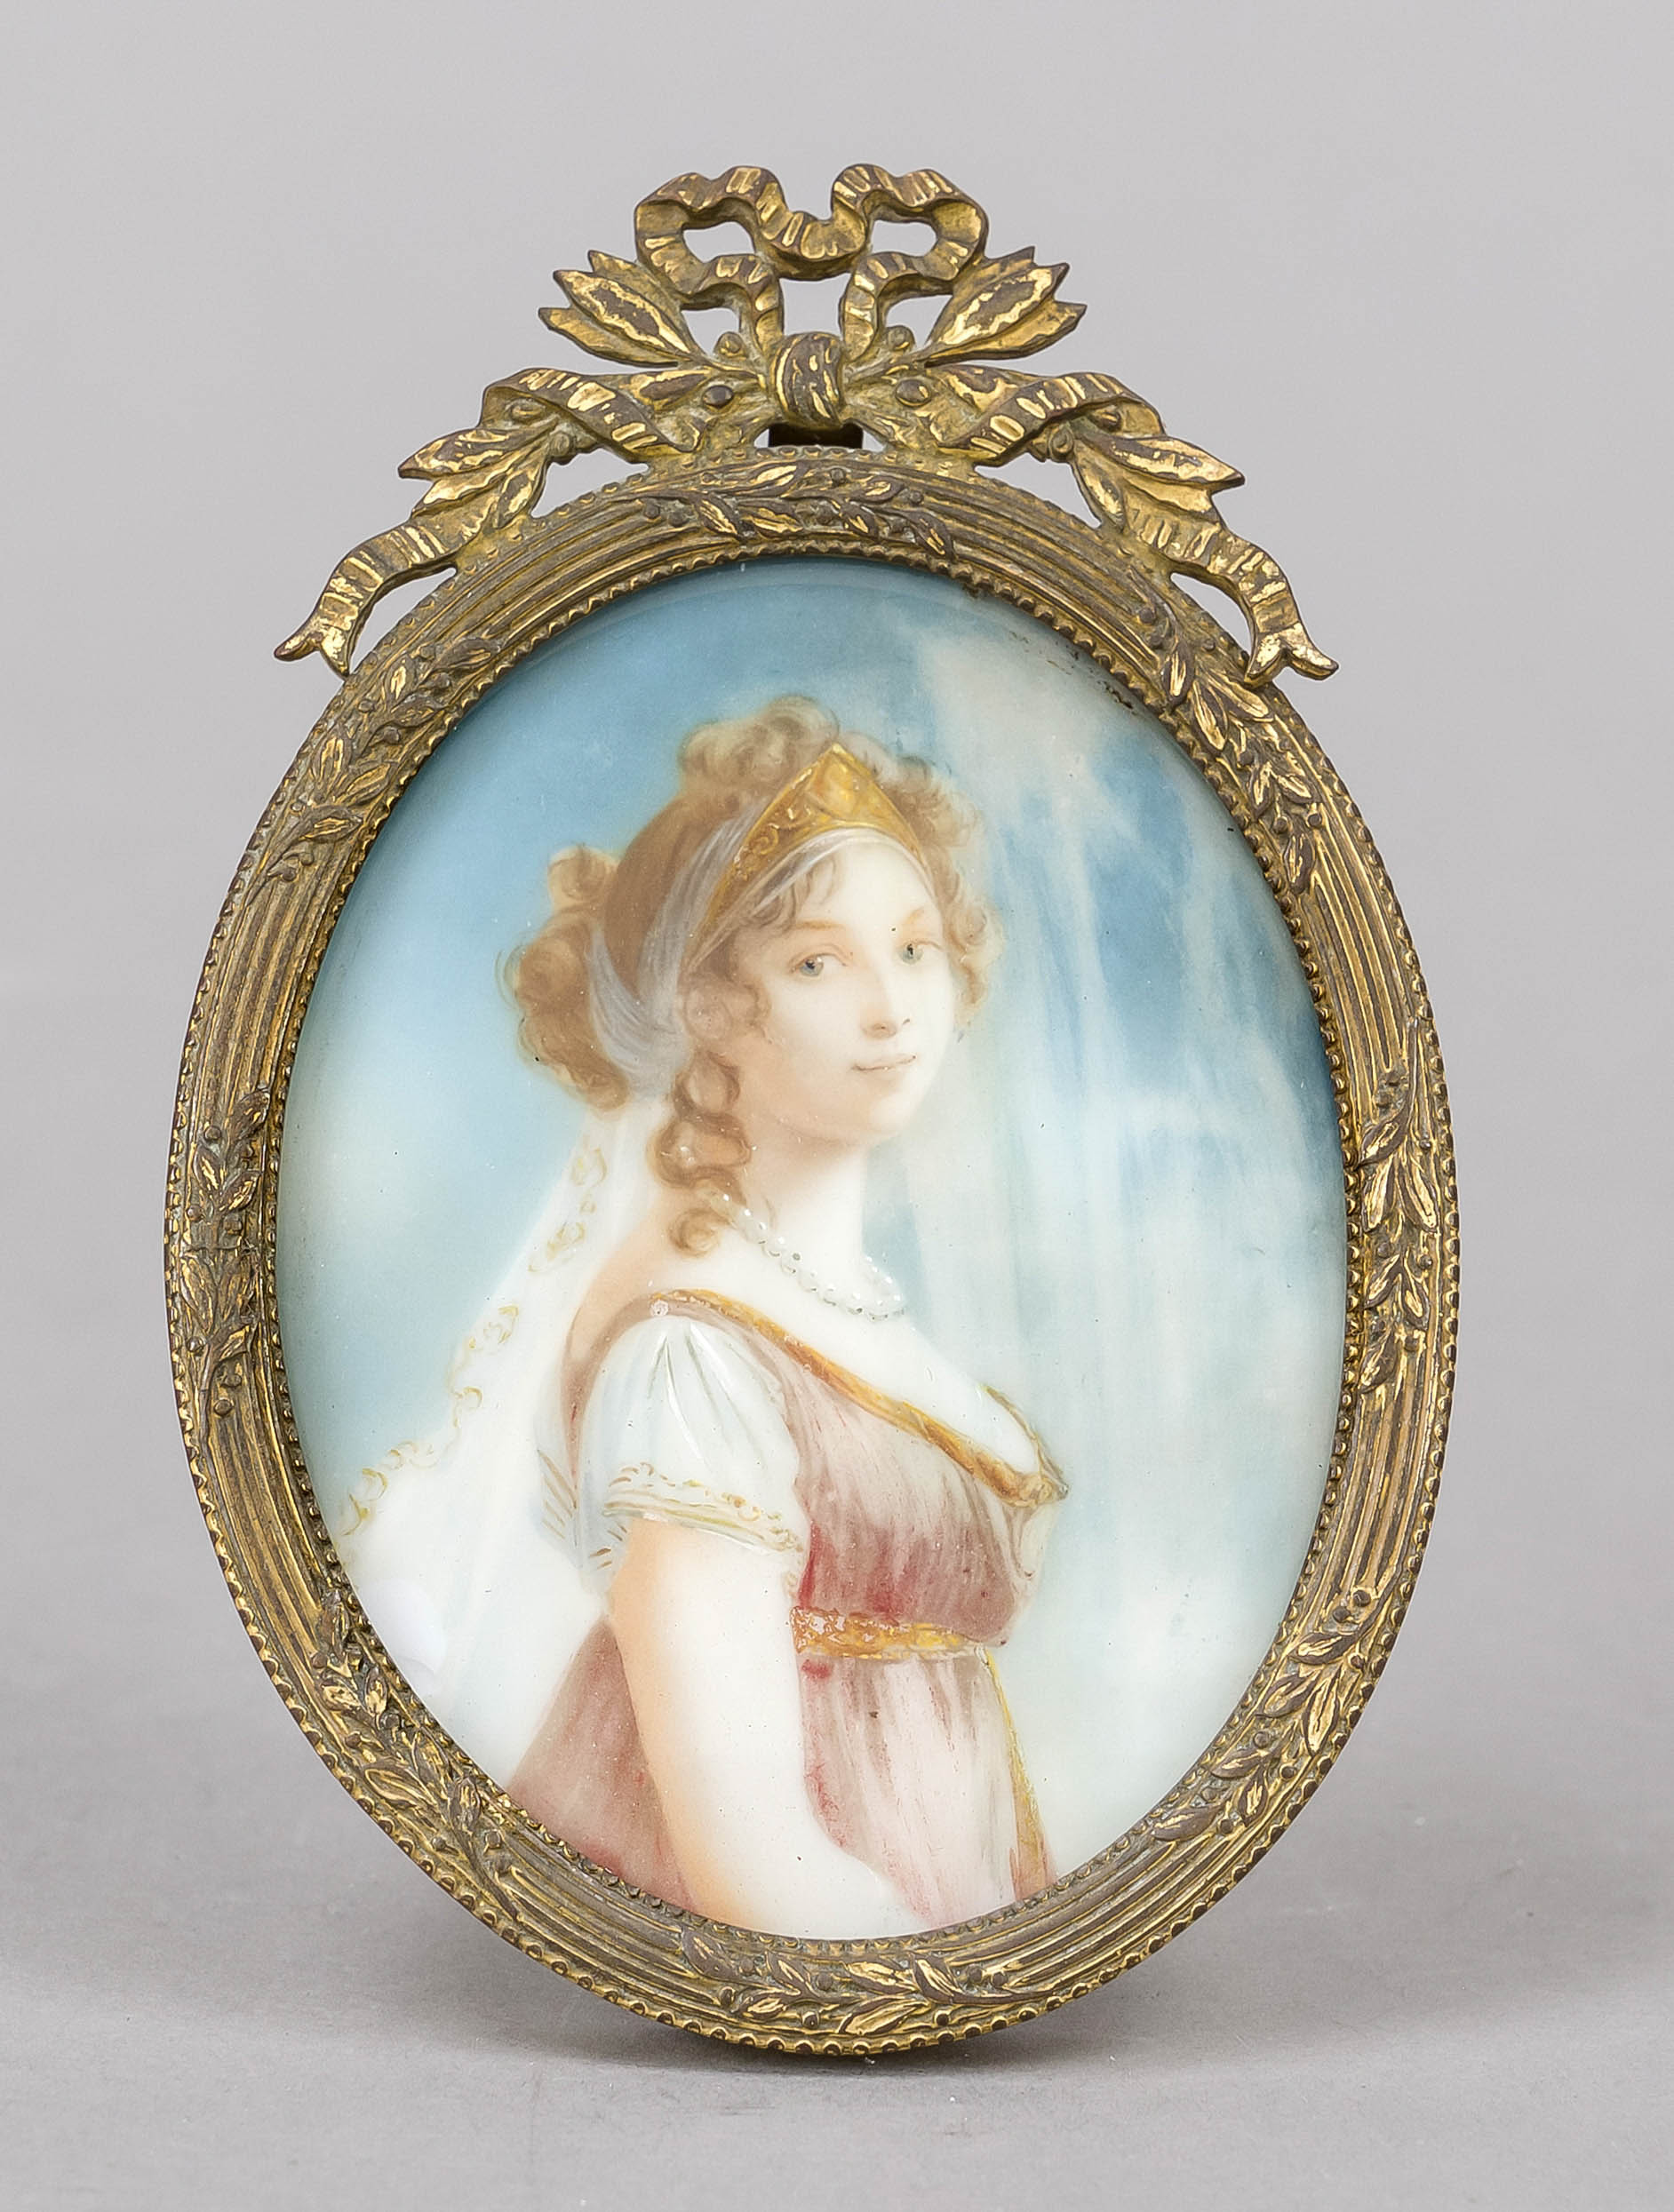 Miniature, 19th century, polychrome tempera painting (probably executed over a printed template)